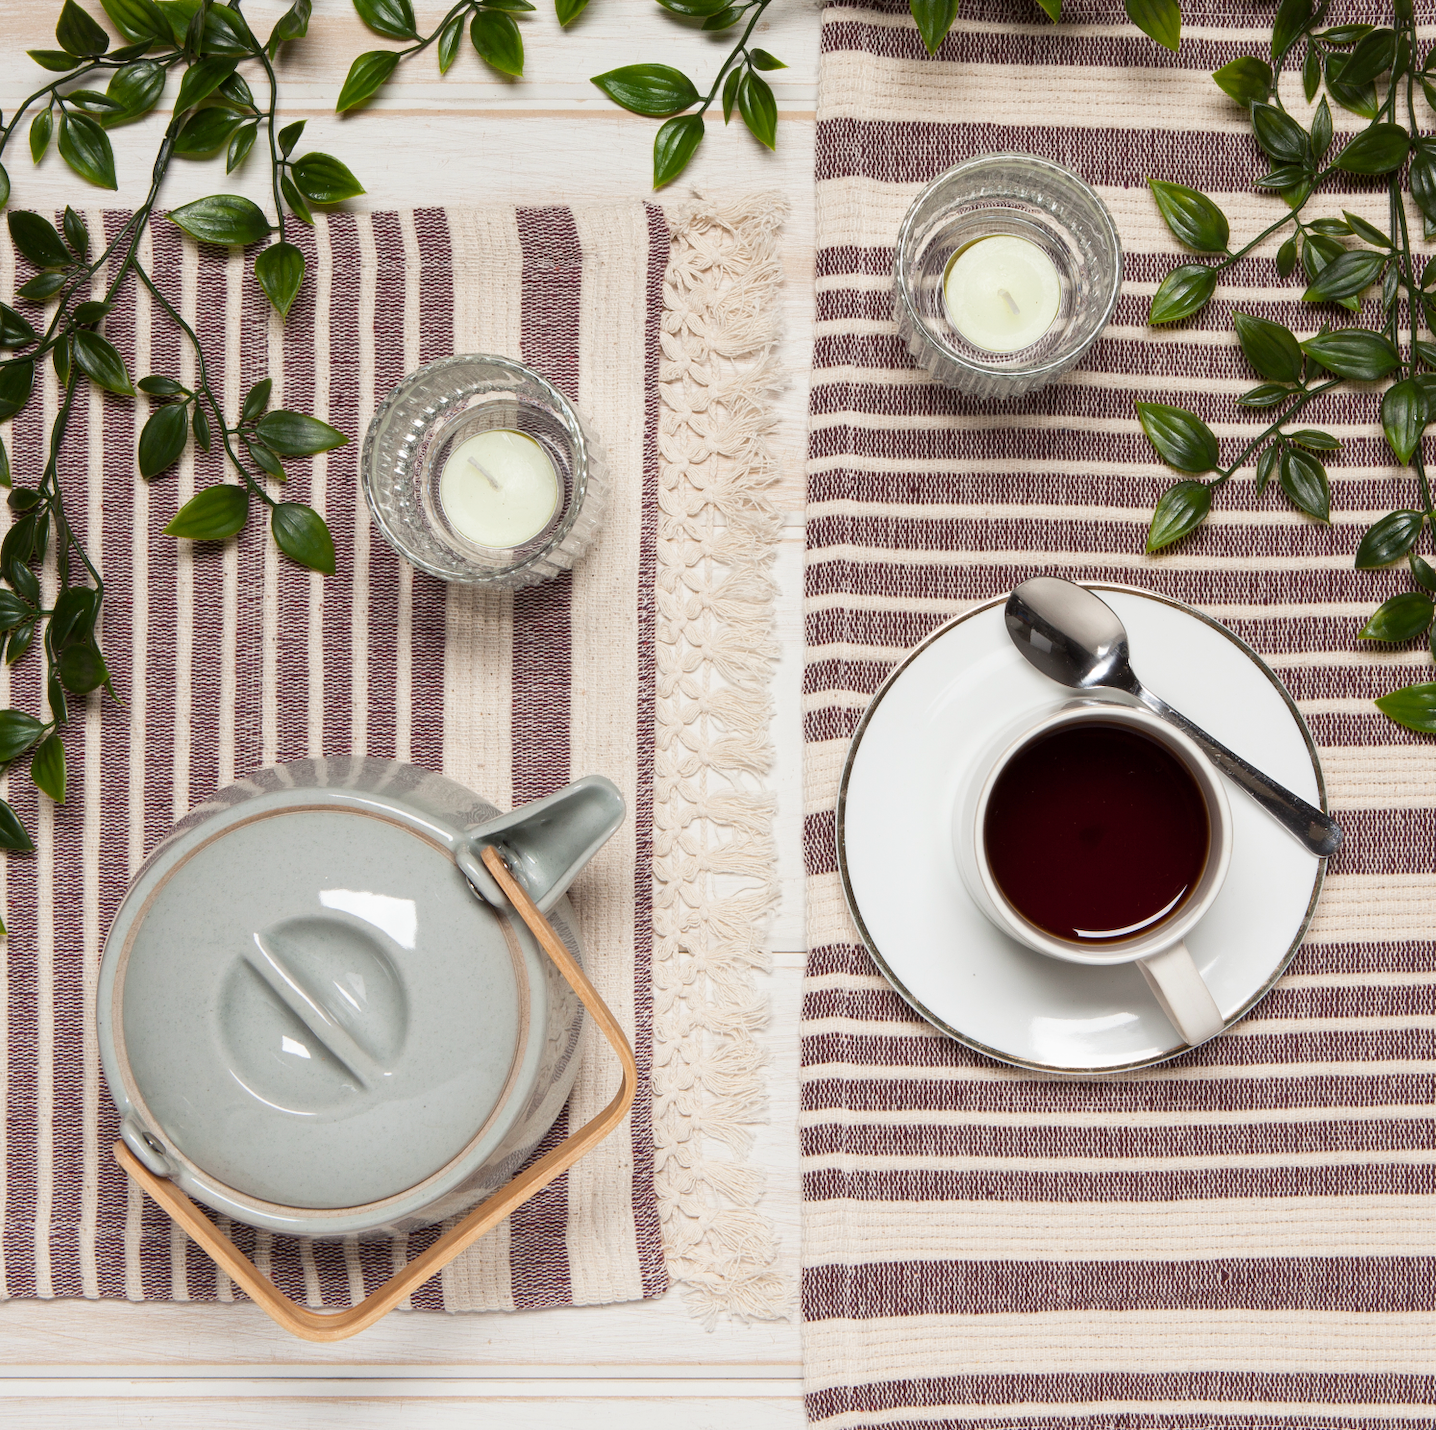 This handwoven soft cotton placemat features tactile stripes that add a sophisticated touch. A delicate tied fringe complements the design